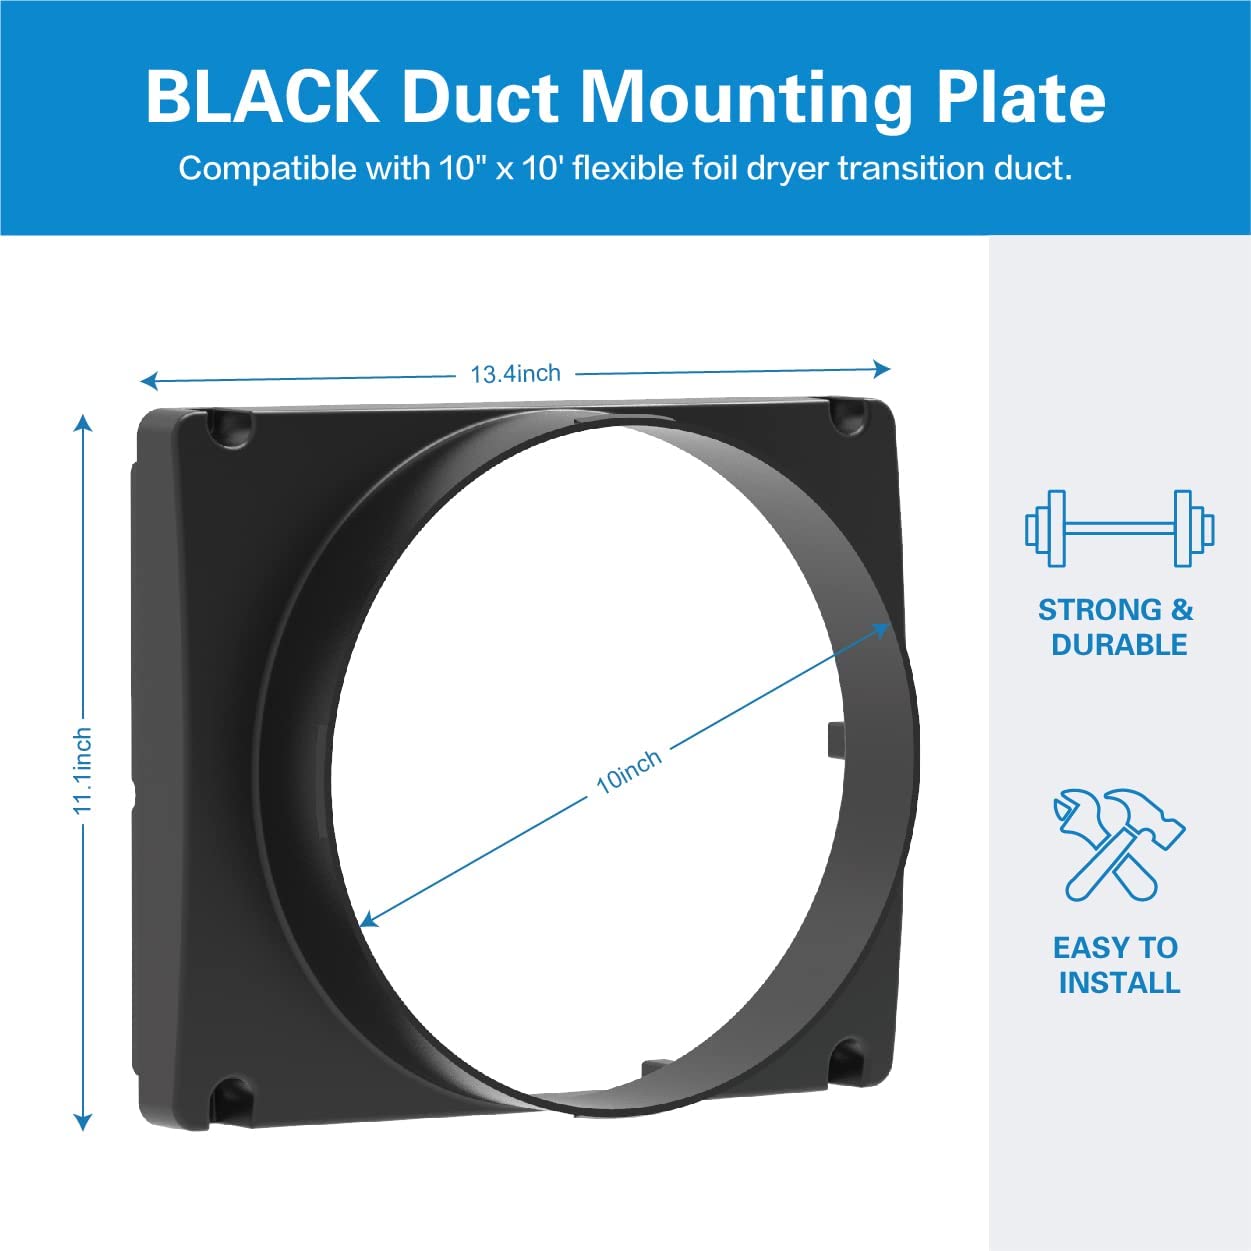 BaseAire Duct Mounting Plate for AirWerx 100X, AirWerx 120X